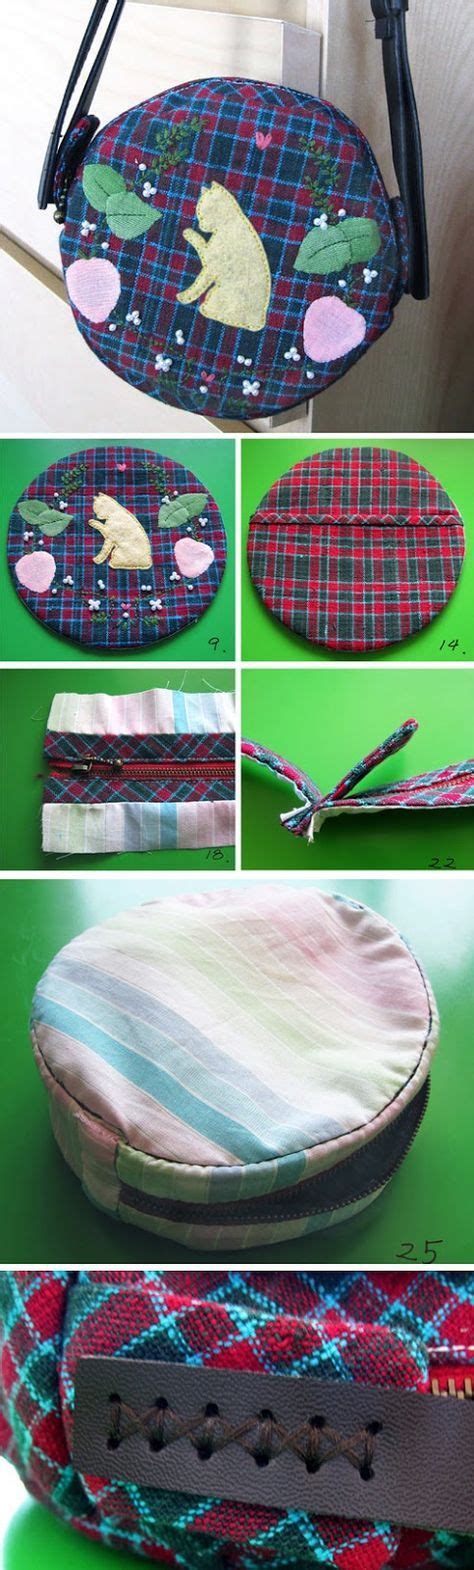 Round Bag With Strap Tutorial Sewing Tutorials Bags Bag Patterns To